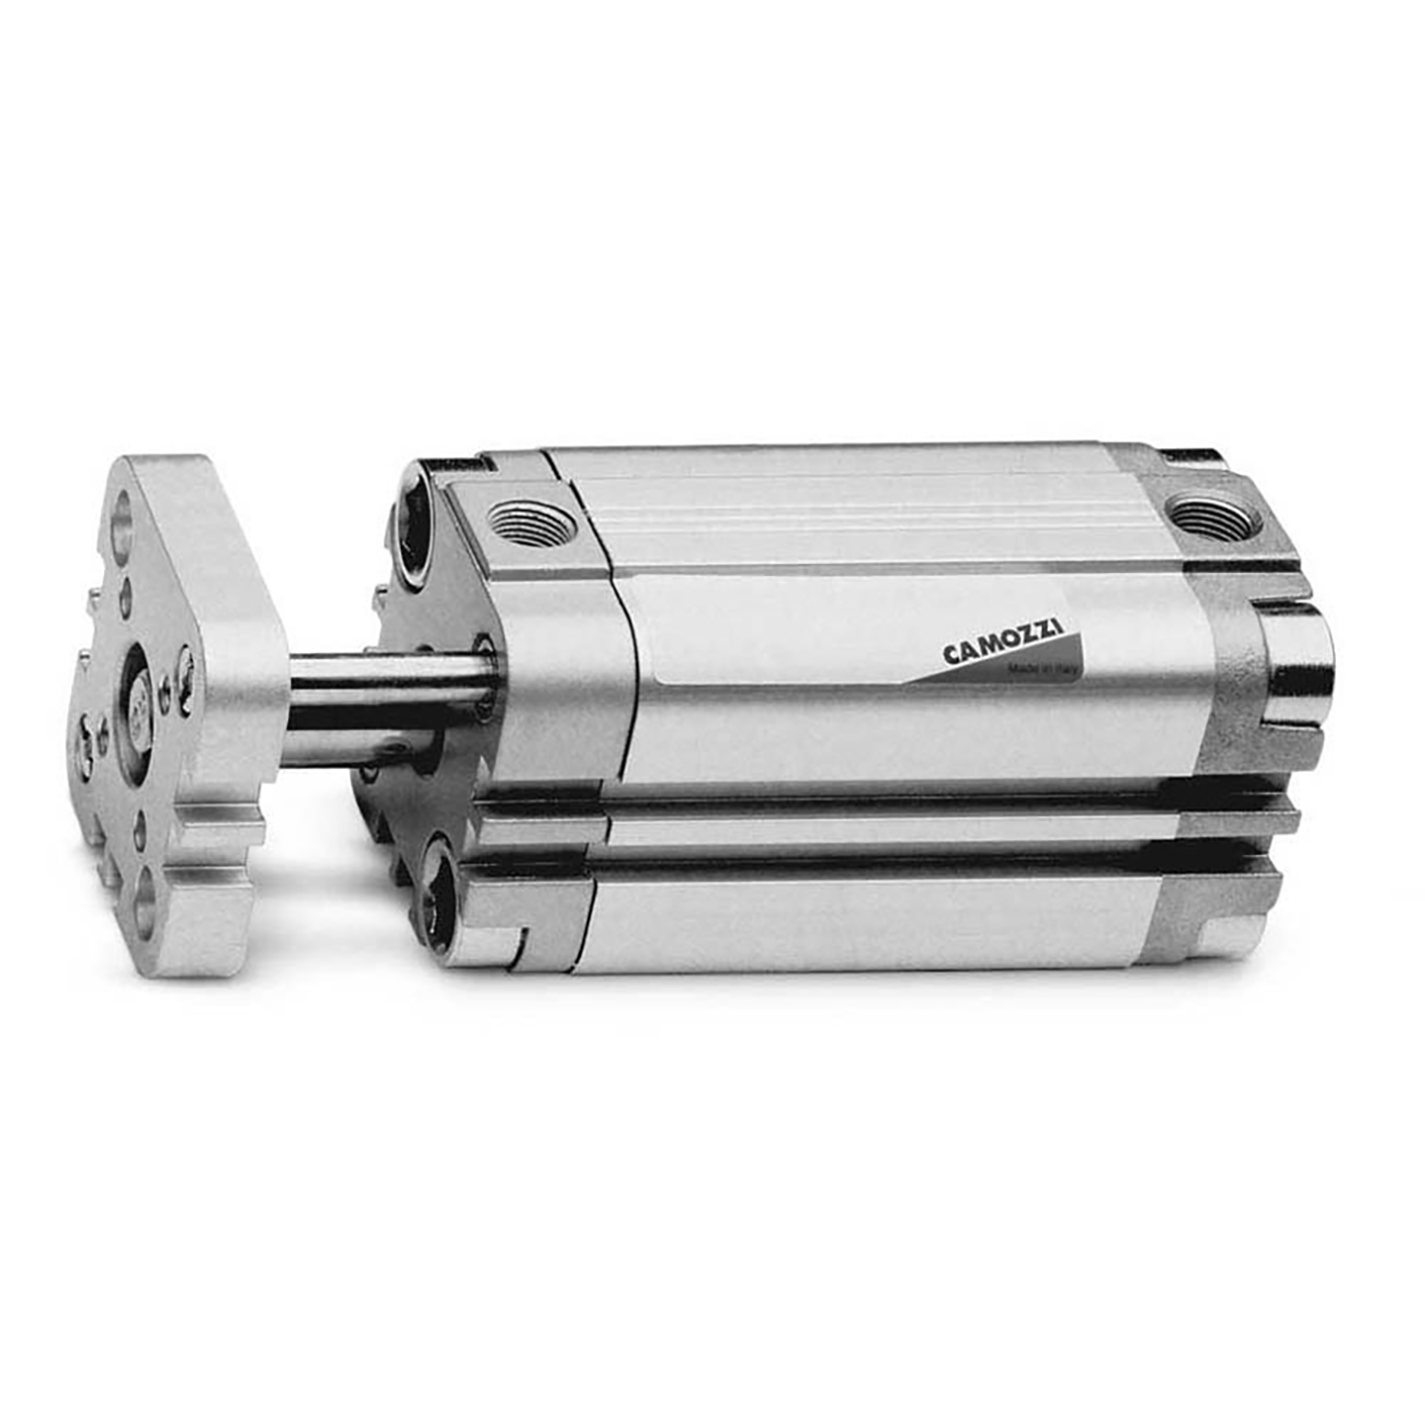 1/8" BSP Parallel Female Ports Series 31 Double Acting Compact Cylinder